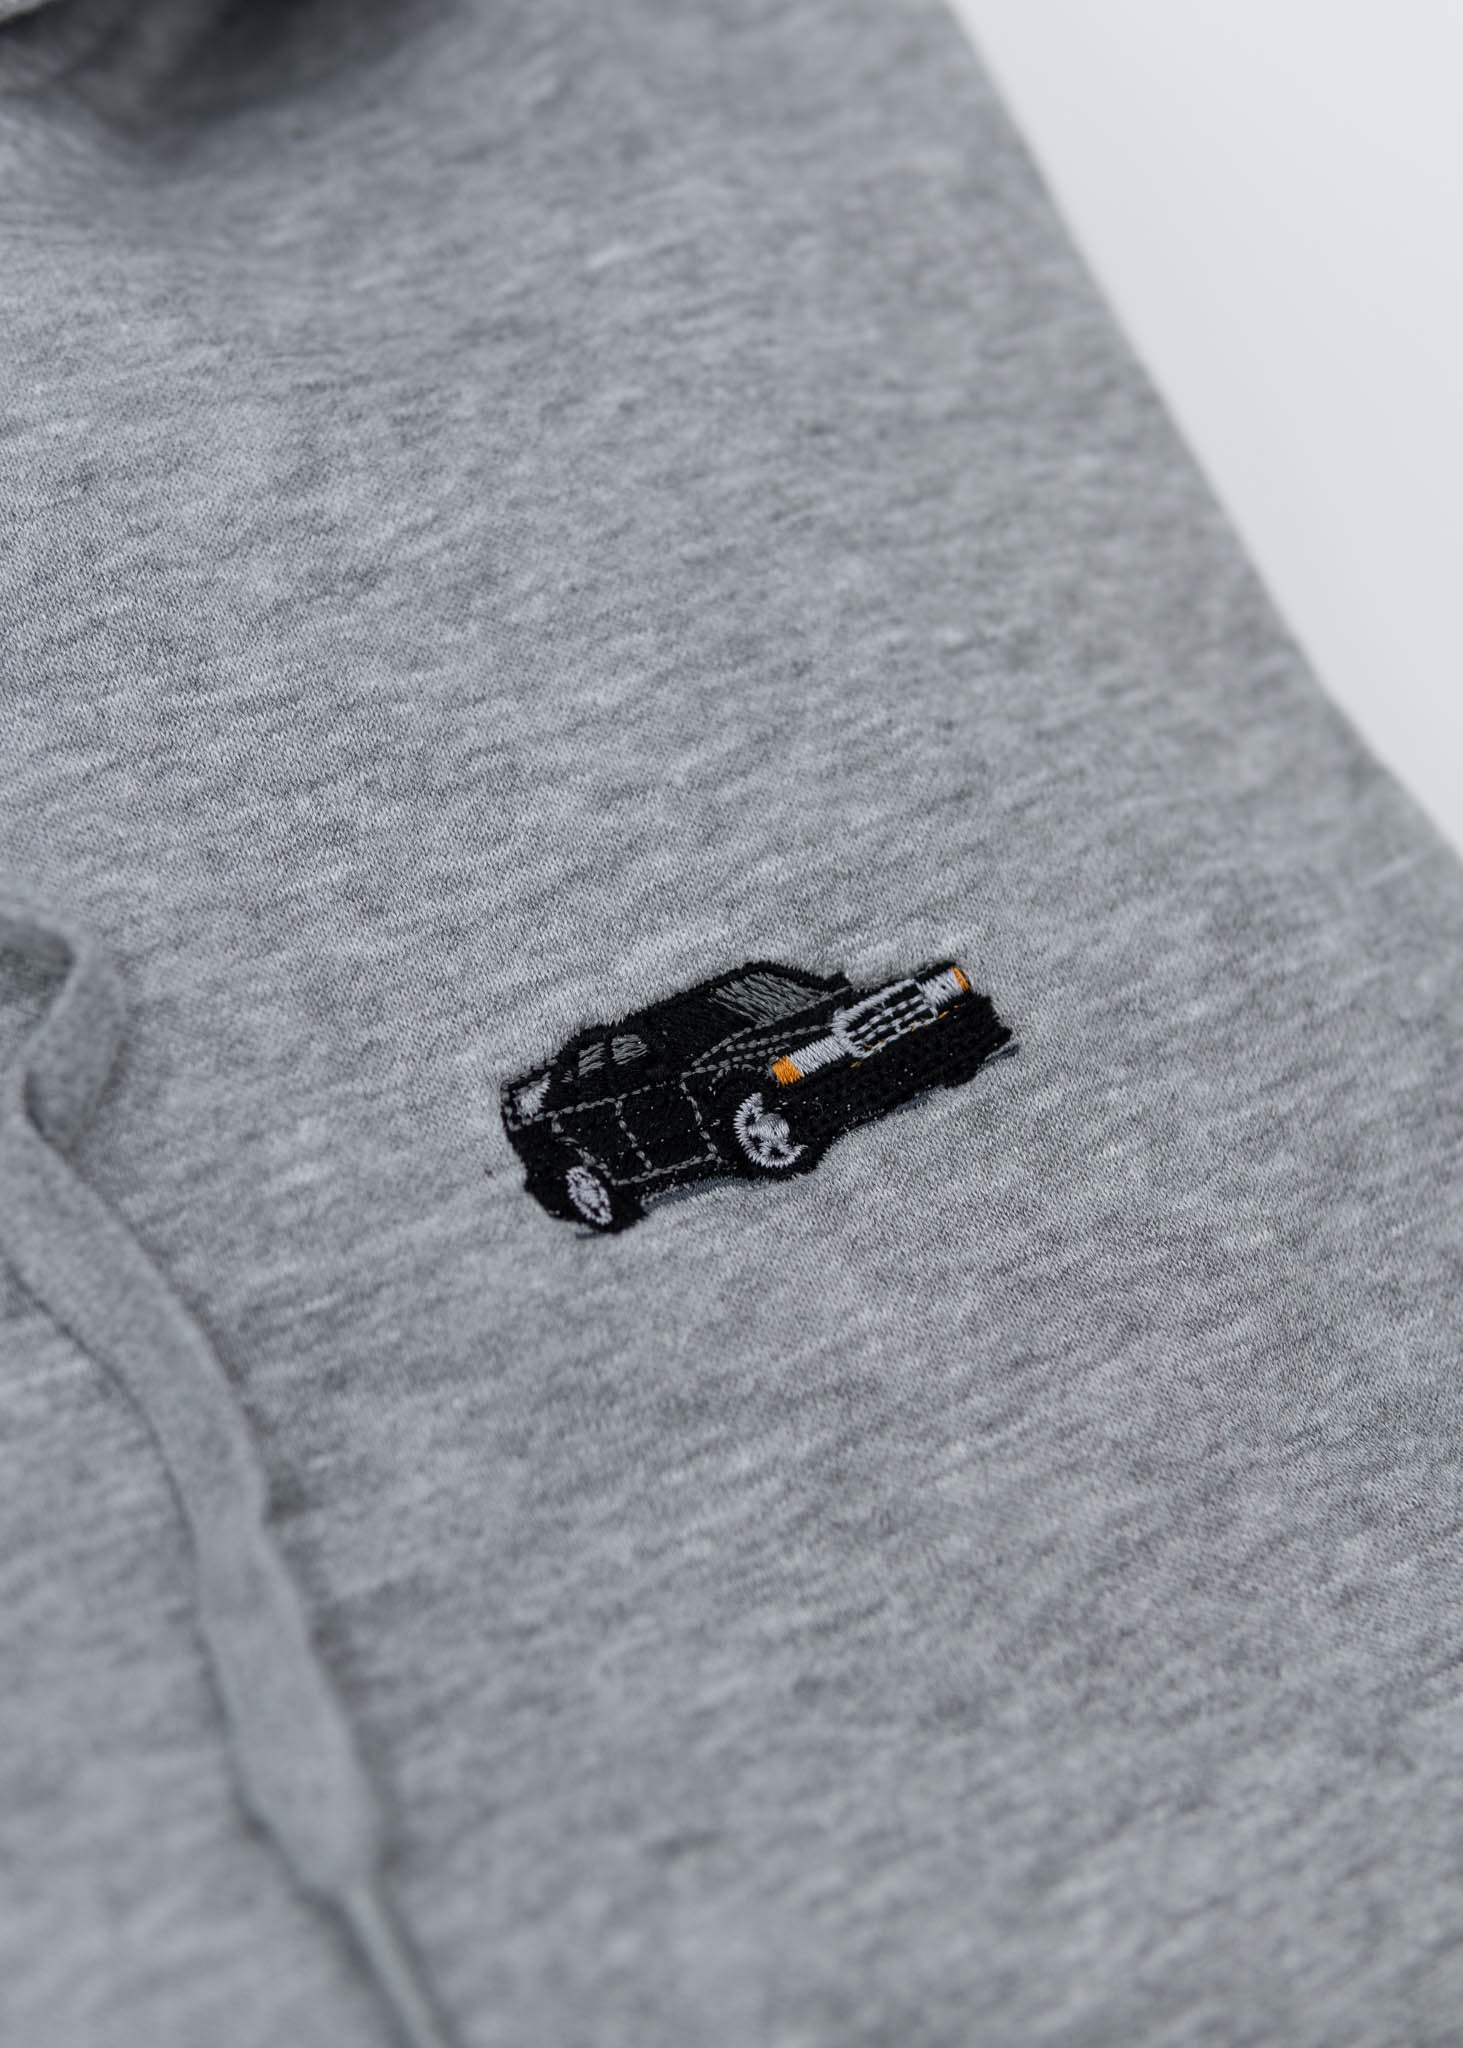 A grey Mercedes-Benz unisex hoodie for men and women. Photo is a close up view of the sweater with an embroidered Mercedes-Benz W201 190E 2.5-16 Evo II. Fabric composition is cotton, polyester, and rayon. The material is very soft, stretchy, and non-transparent. The style of this hoodie is long sleeve, crewneck with a hood, hooded, with embroidery on the left chest.